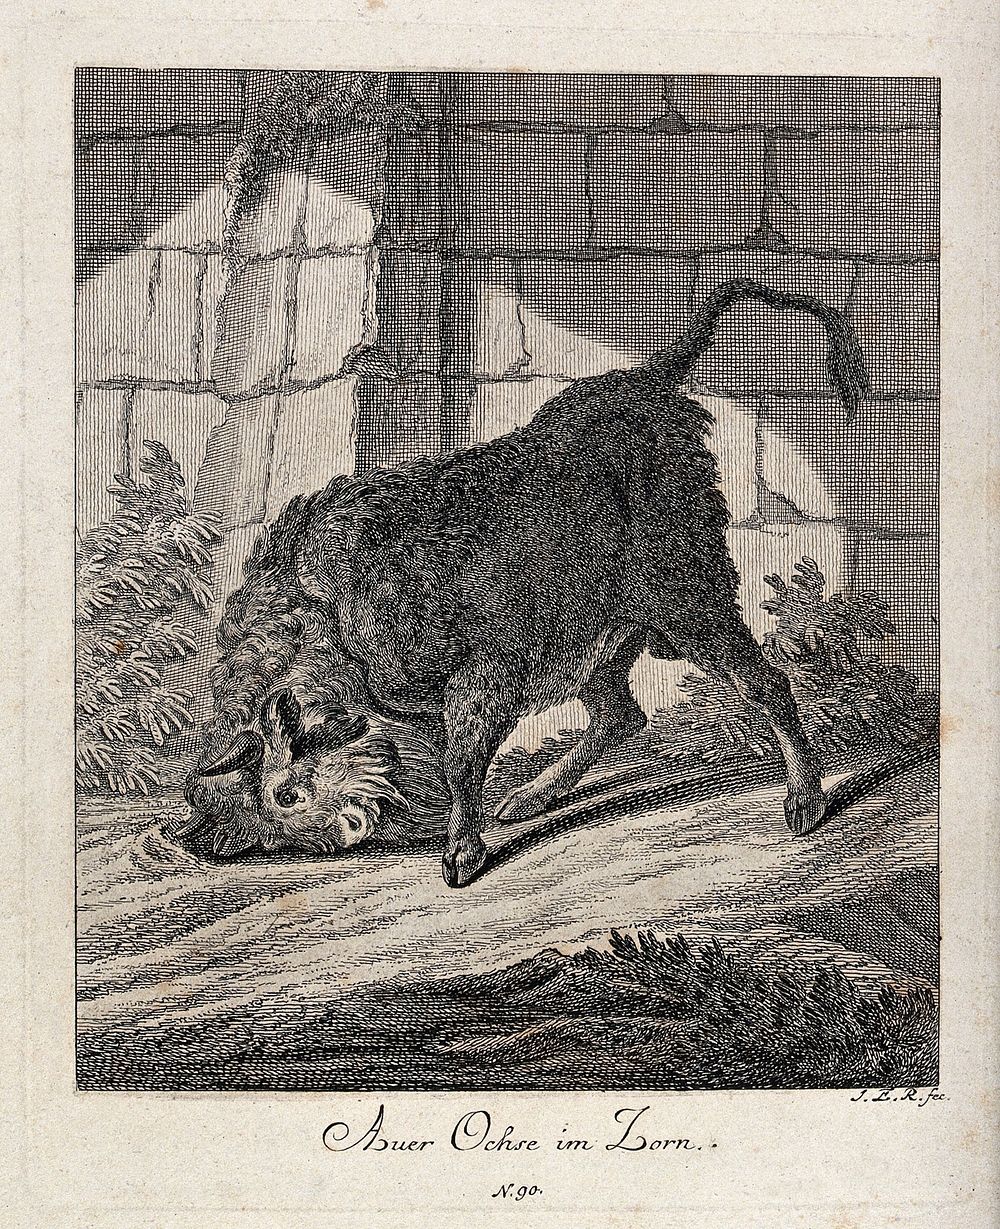 A raging aurochs turning up ground with its horns in an enclosure. Etching by J. E. Ridinger.